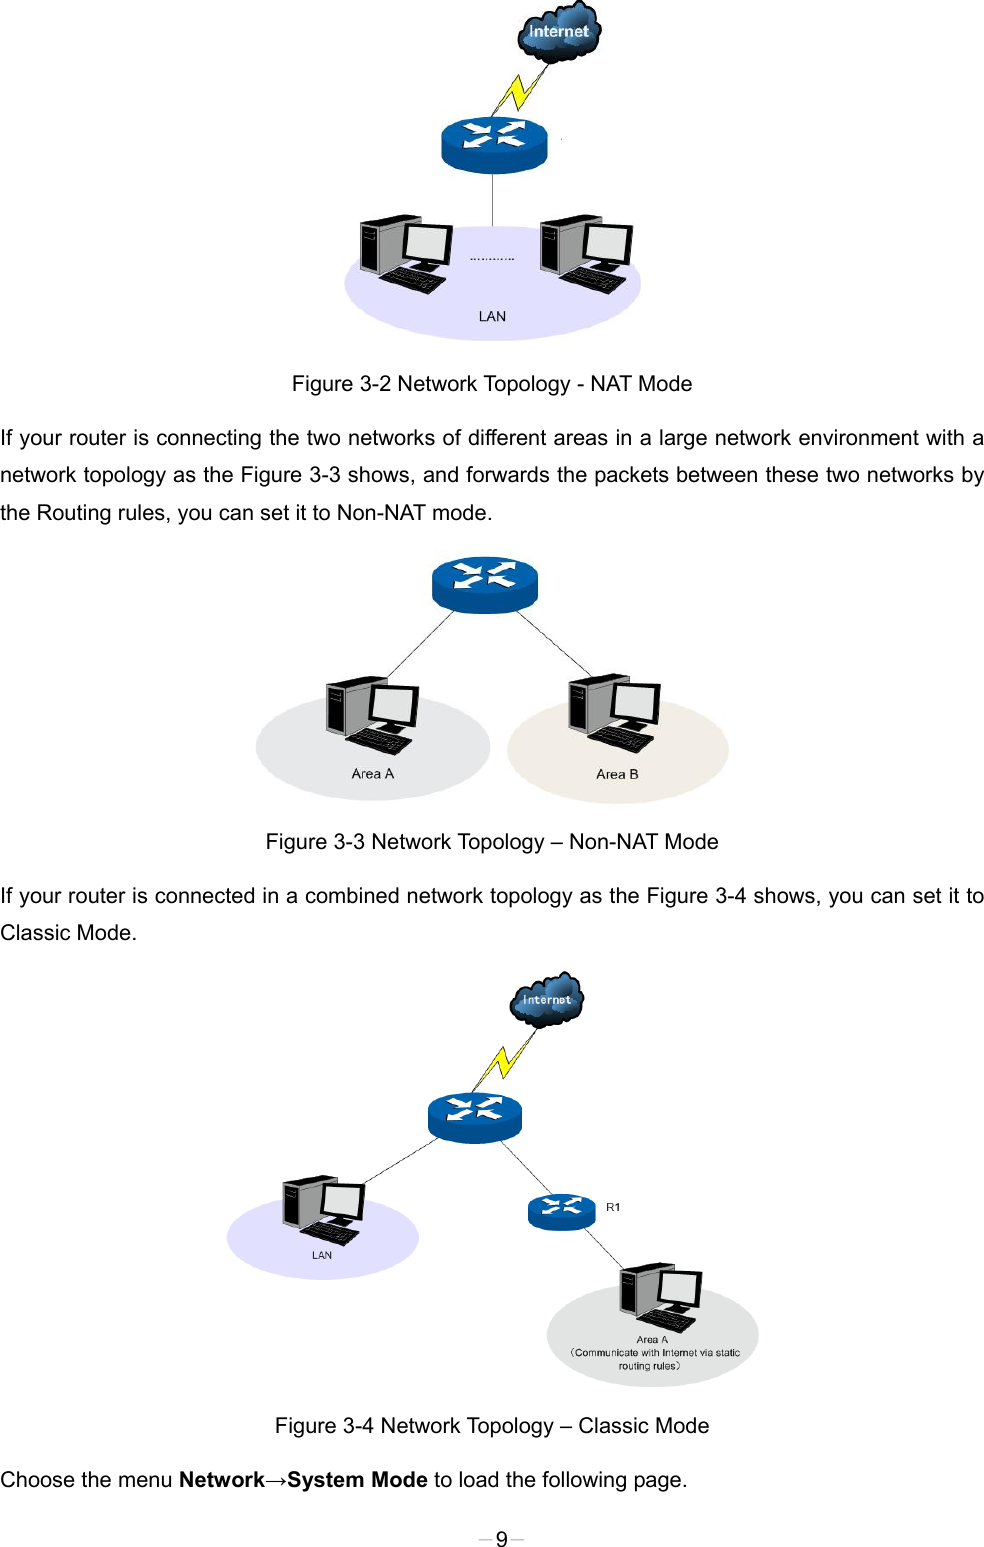   Figure 3-2 Network Topology - NAT Mode If your router is connecting the two networks of different areas in a large network environment with a network topology as the Figure 3-3 shows, and forwards the packets between these two networks by the Routing rules, you can set it to Non-NAT mode.  Figure 3-3 Network Topology – Non-NAT Mode If your router is connected in a combined network topology as the Figure 3-4 shows, you can set it to Classic Mode.  Figure 3-4 Network Topology – Classic Mode Choose the menu Network→System Mode to load the following page. -9- 